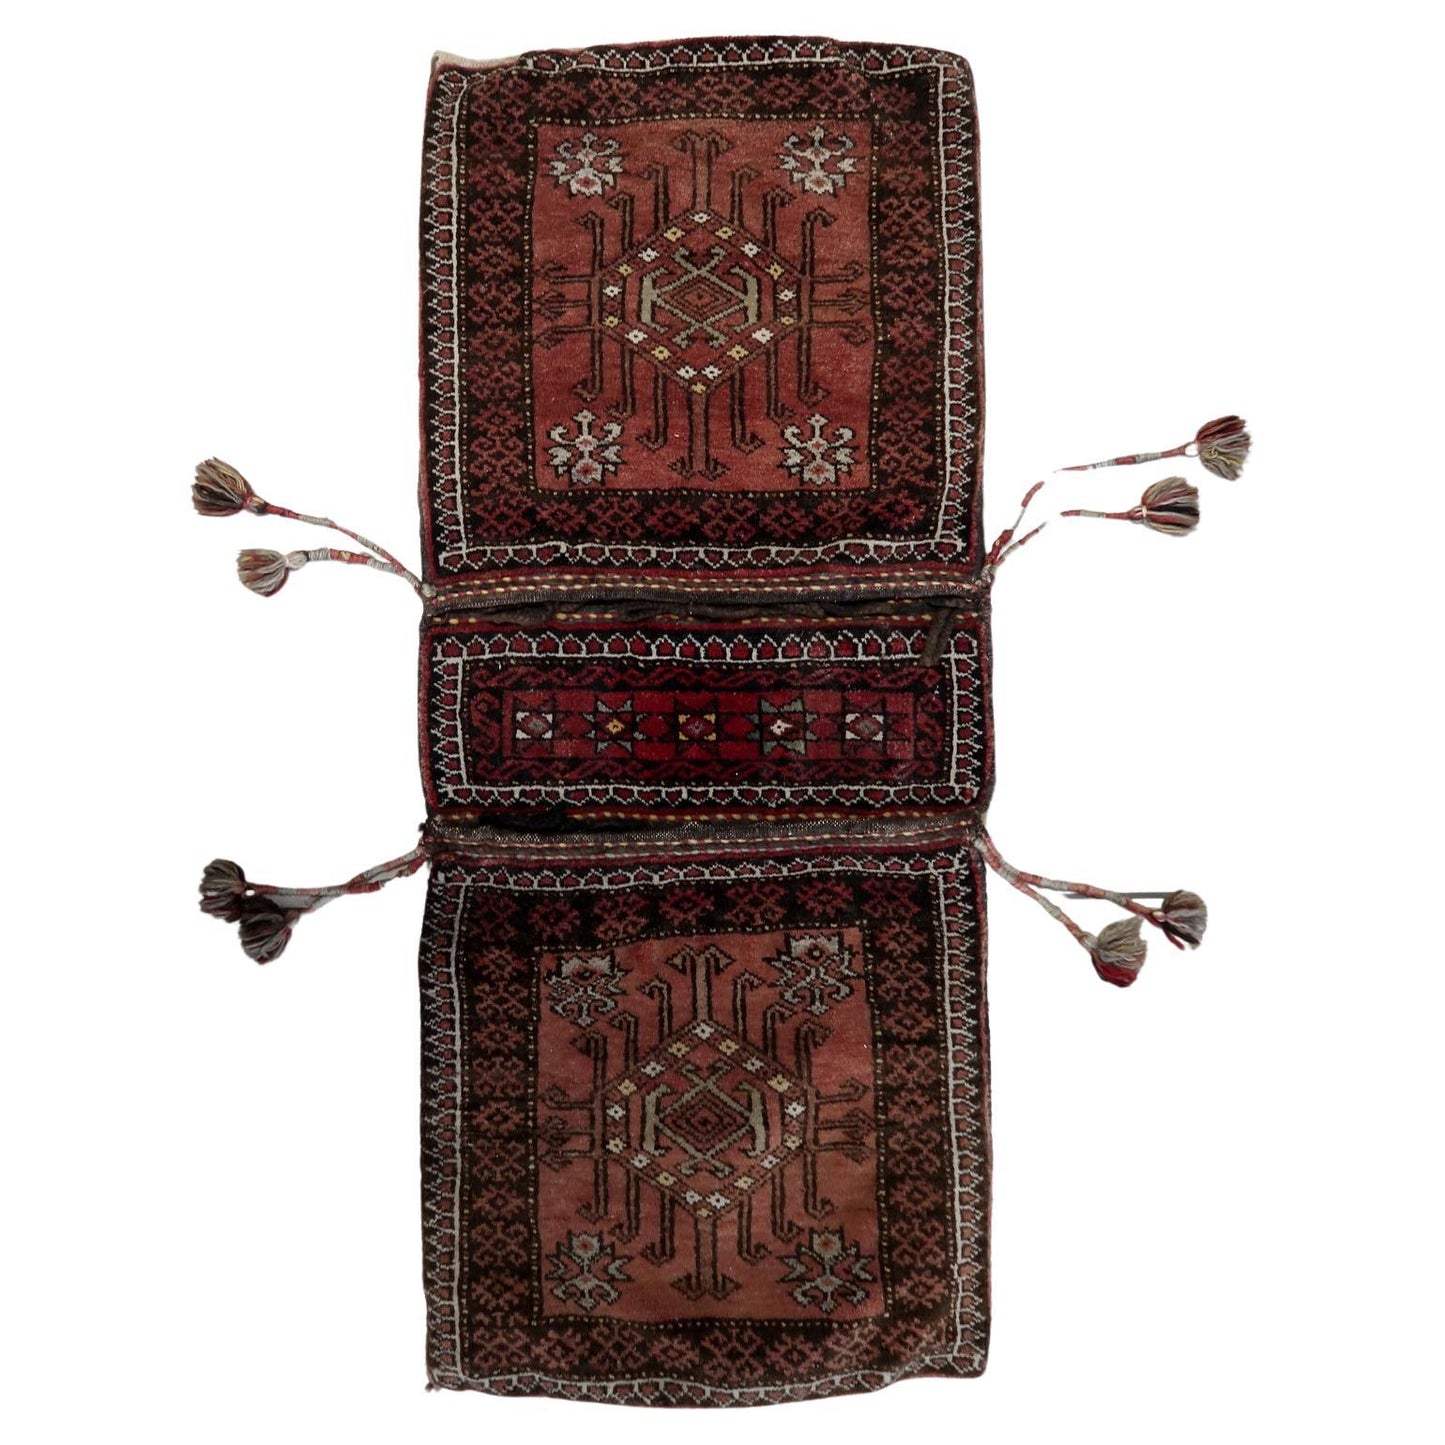 Handmade Antique Afghan Baluch Saddle Bag showcasing intricate woven patterns in deep reds, browns, and beige